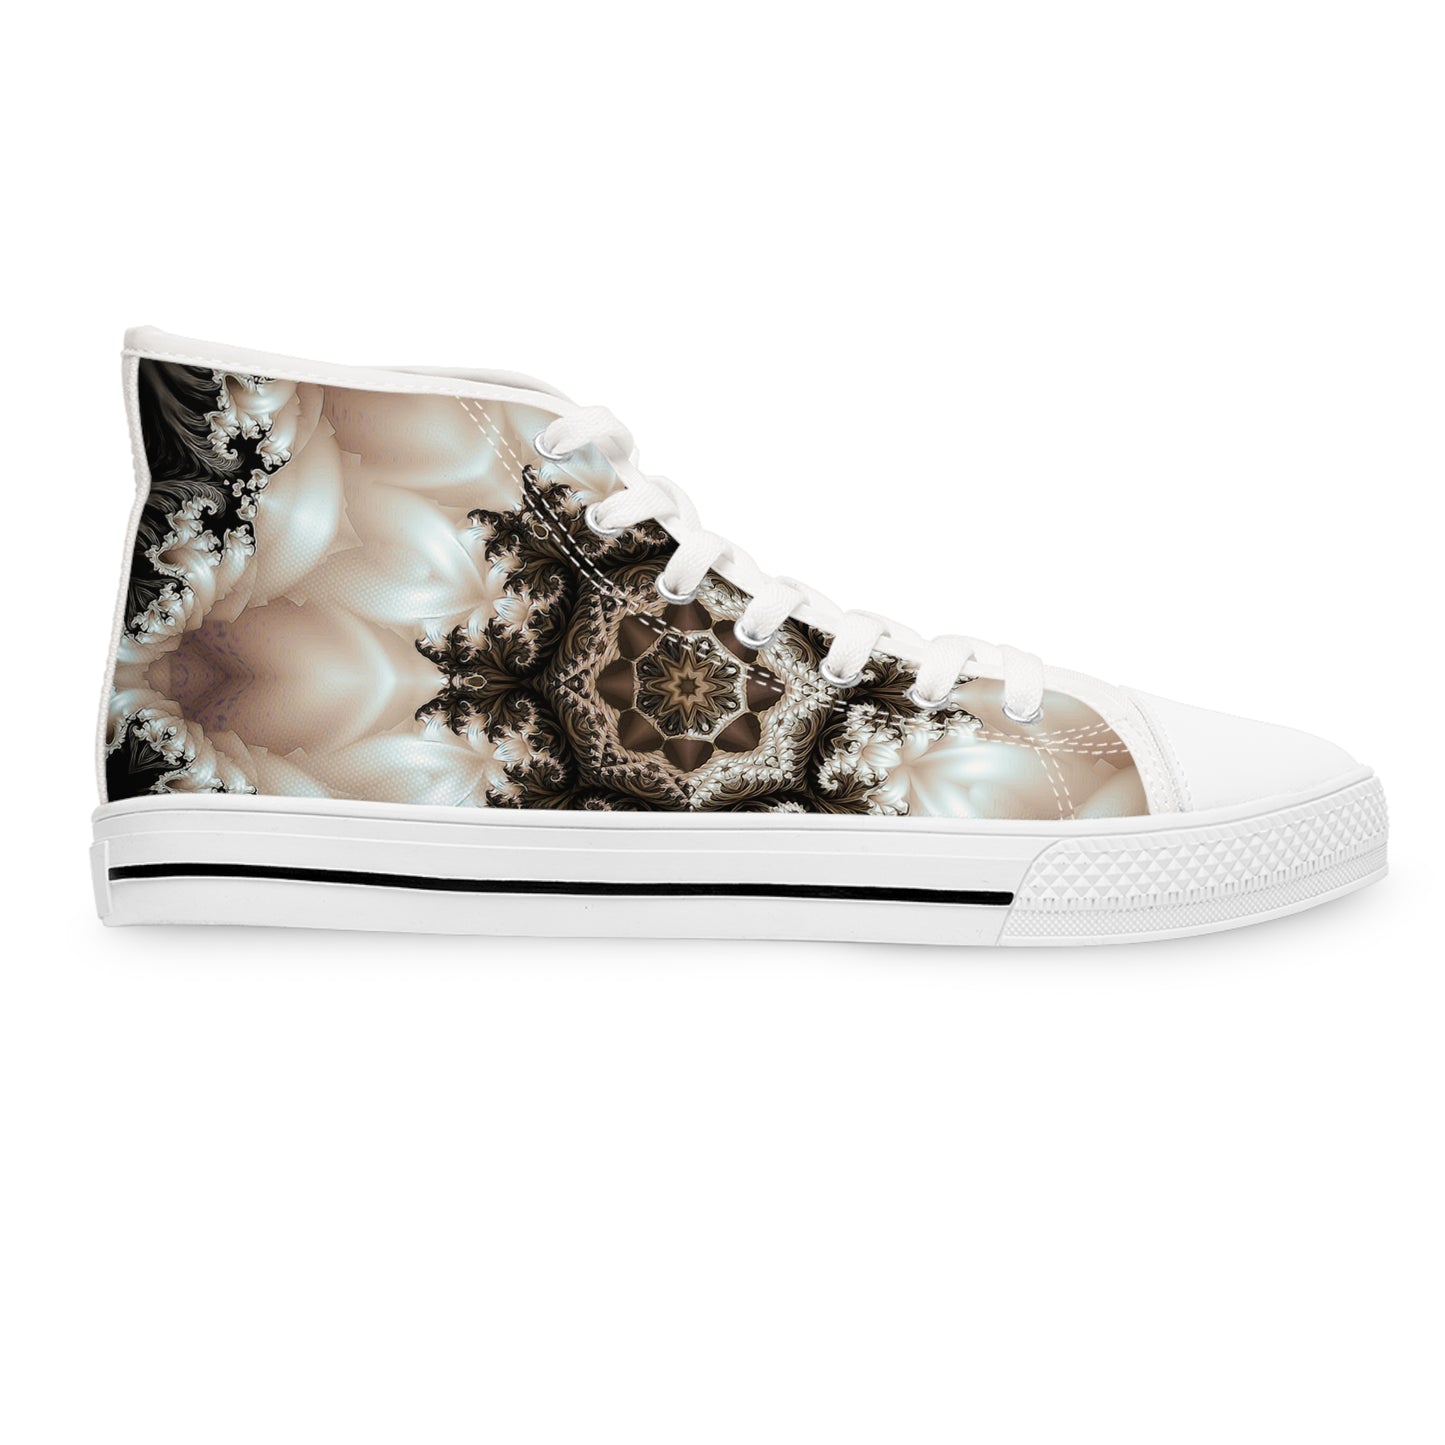 "Duality" WOMEN'S HIGHT TOP SNEAKERS